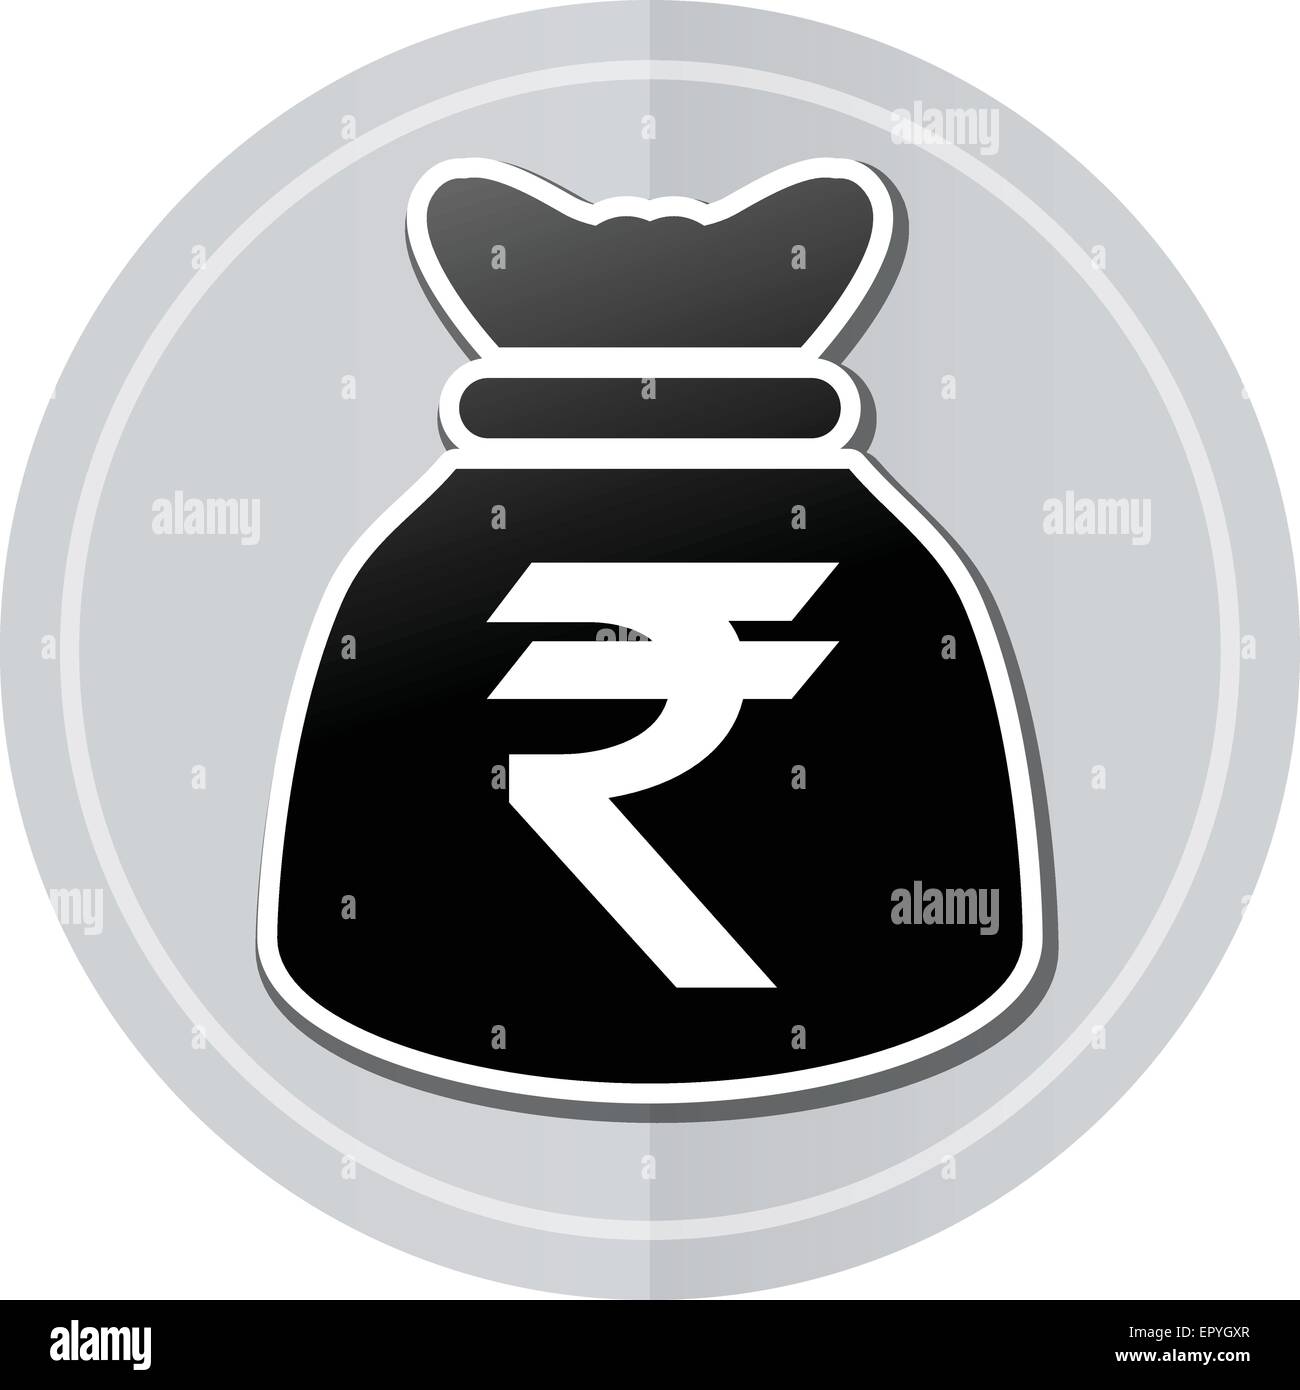 Illustration of rupees bag sticker icon simple design Stock Vector